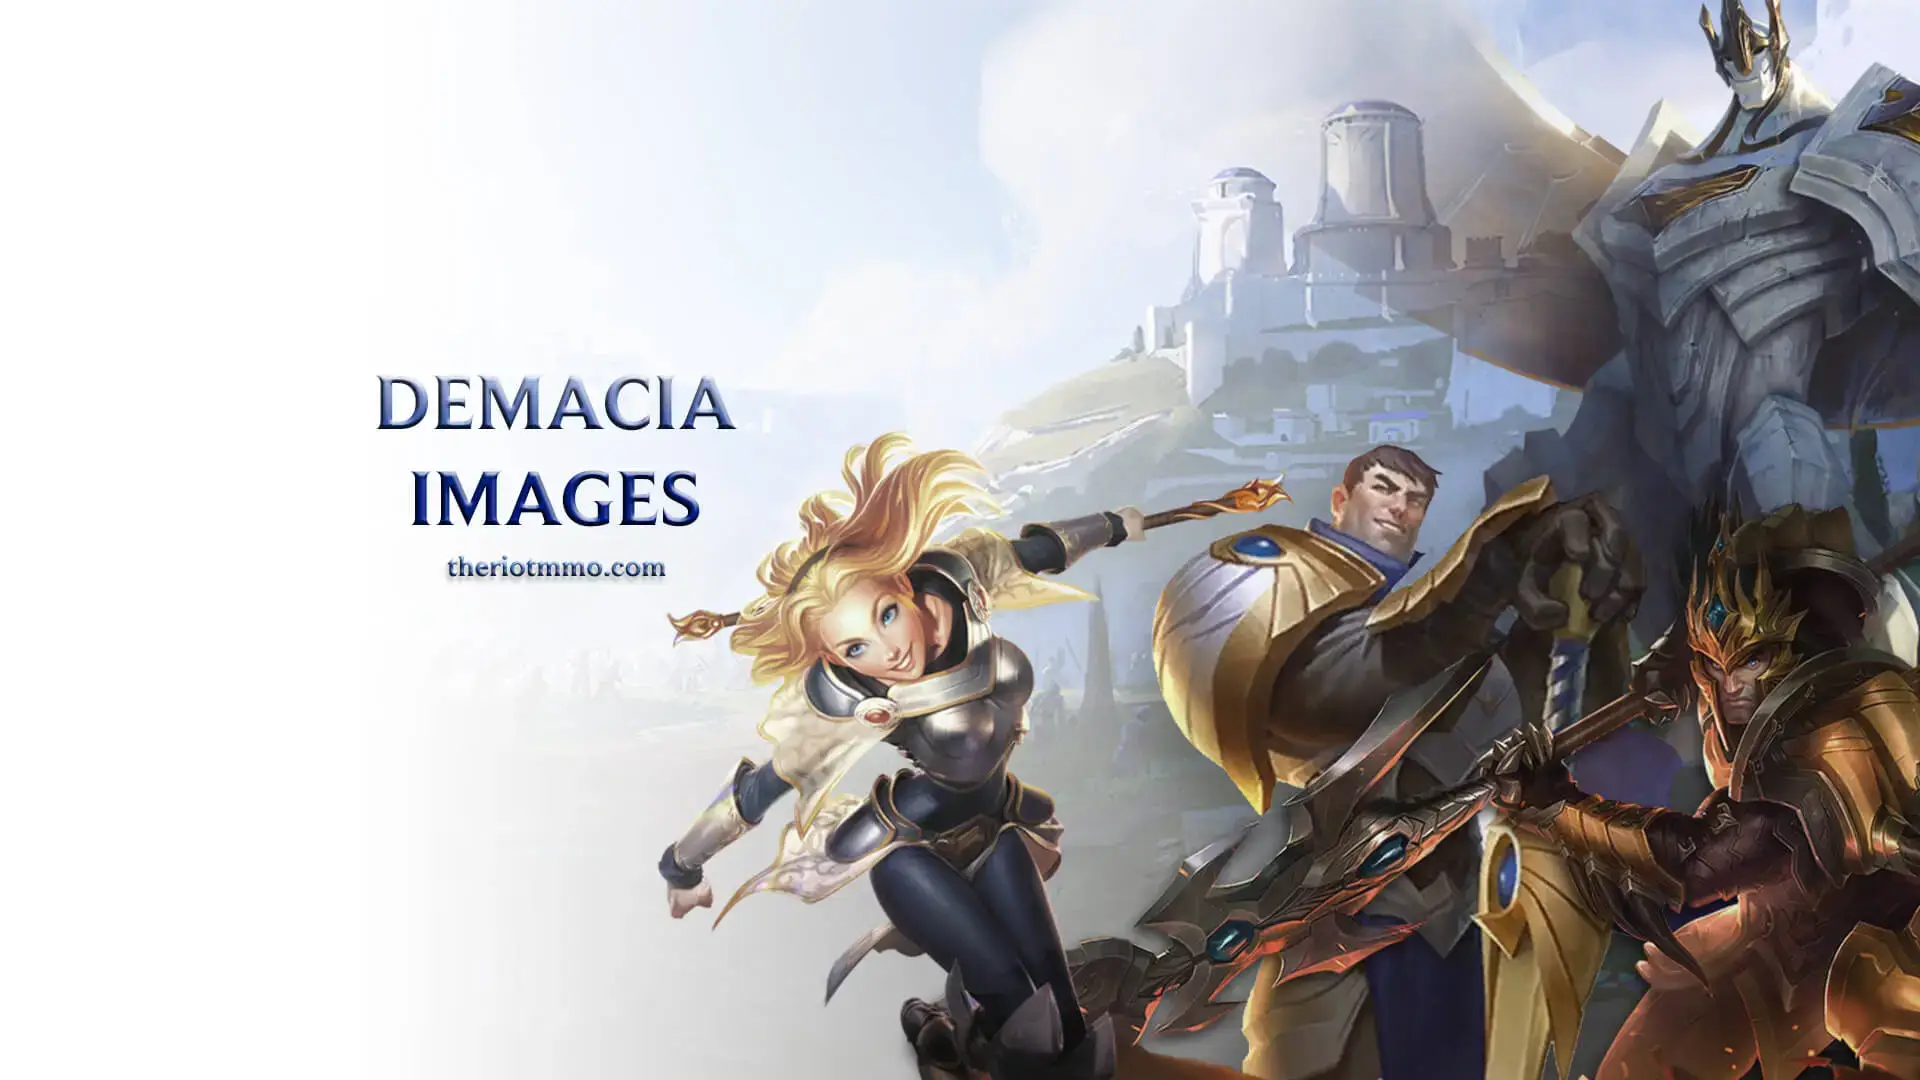 Collection of champions from Demacia together including Galio, Lux, Garen and Jarvan IV